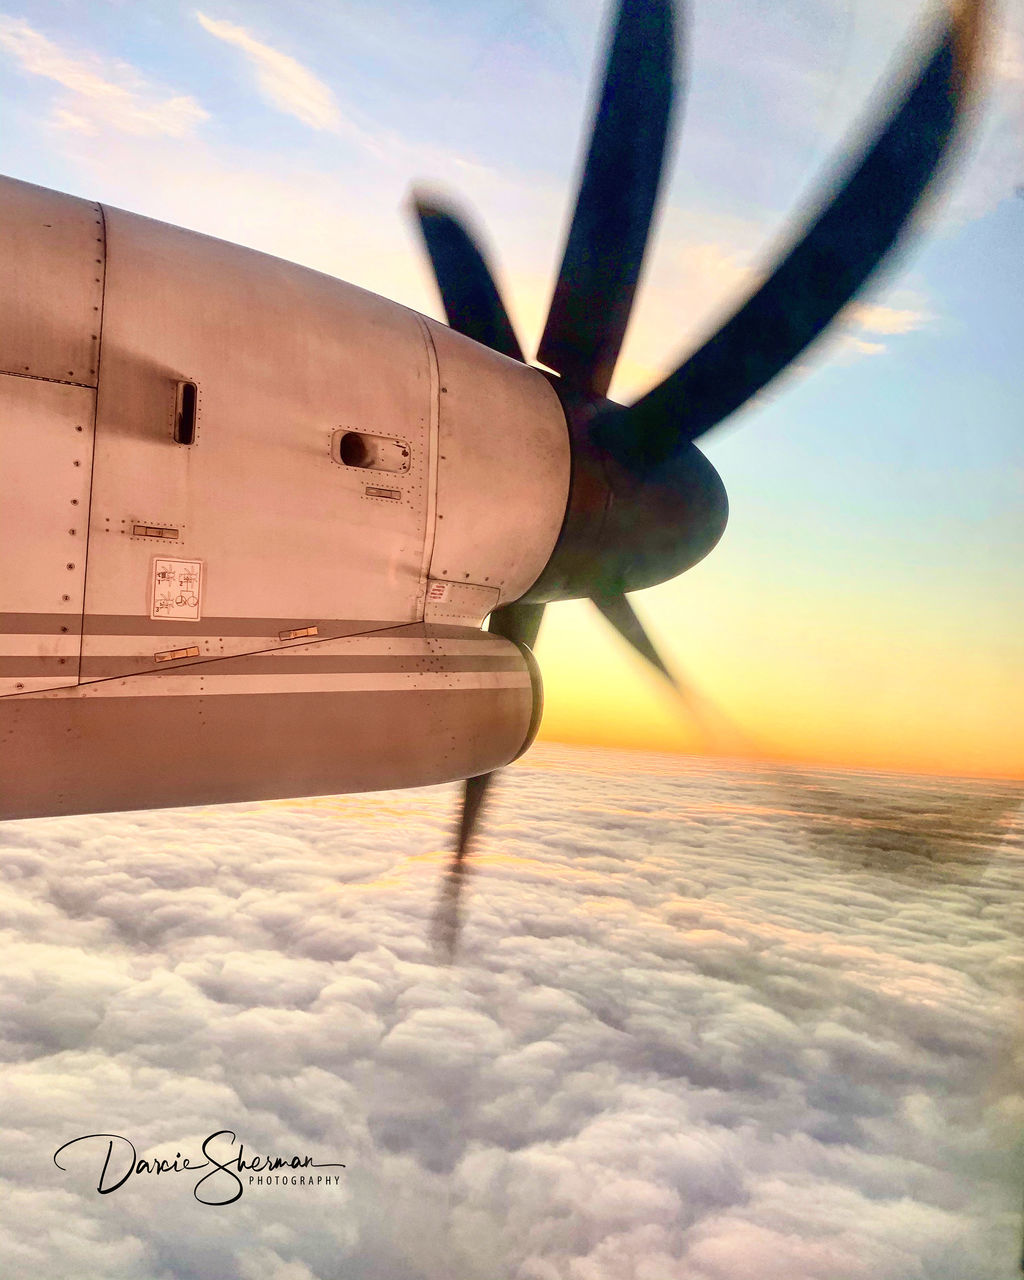 transportation, cloud - sky, sky, mode of transportation, airplane, air vehicle, no people, travel, nature, sunset, flying, scenics - nature, cloudscape, motion, beauty in nature, outdoors, engine, aircraft wing, on the move, mid-air